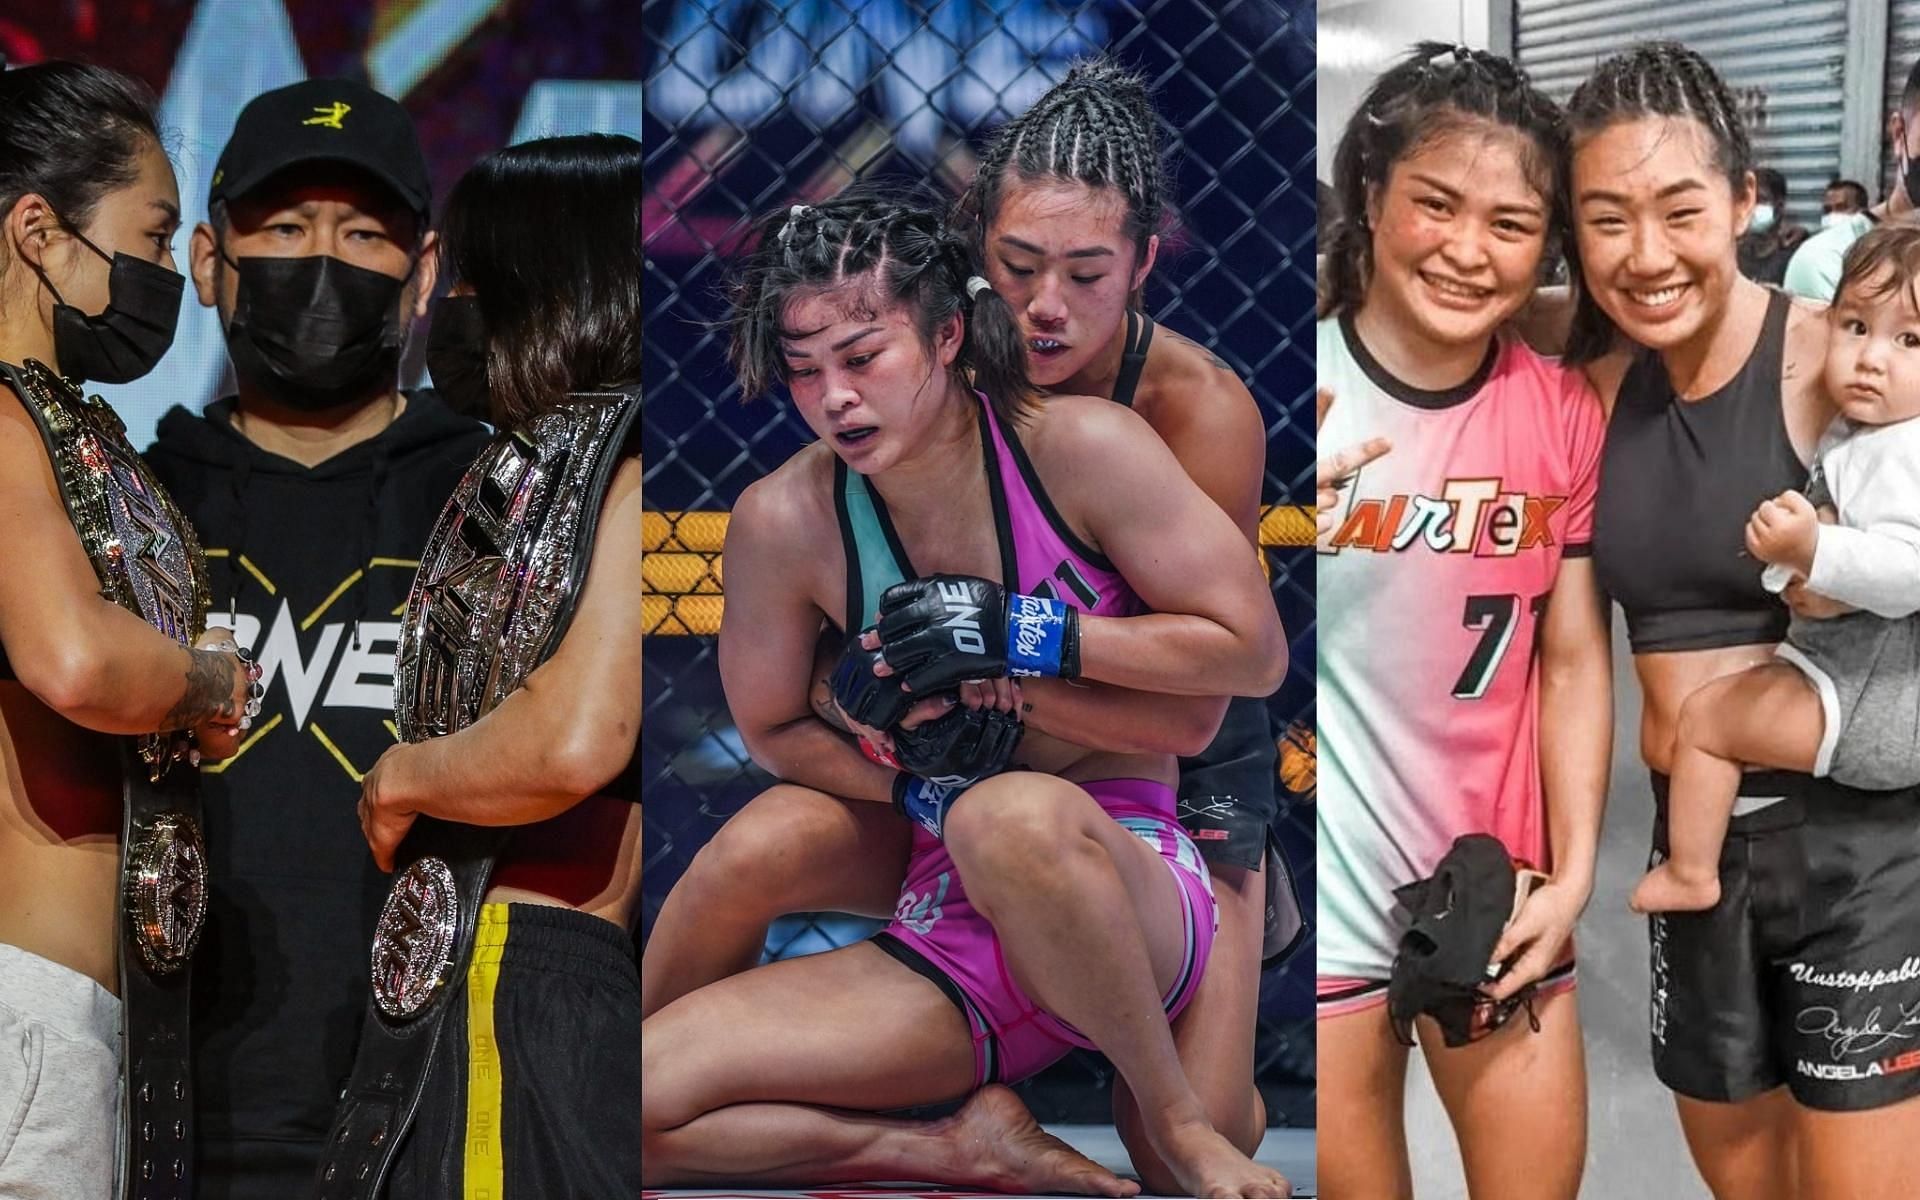 What a journey it has been for Angela Lee and Stamp Fairtex at ONE X. (Images courtesy: ONE Championship, @angelaleemma on Instagram)